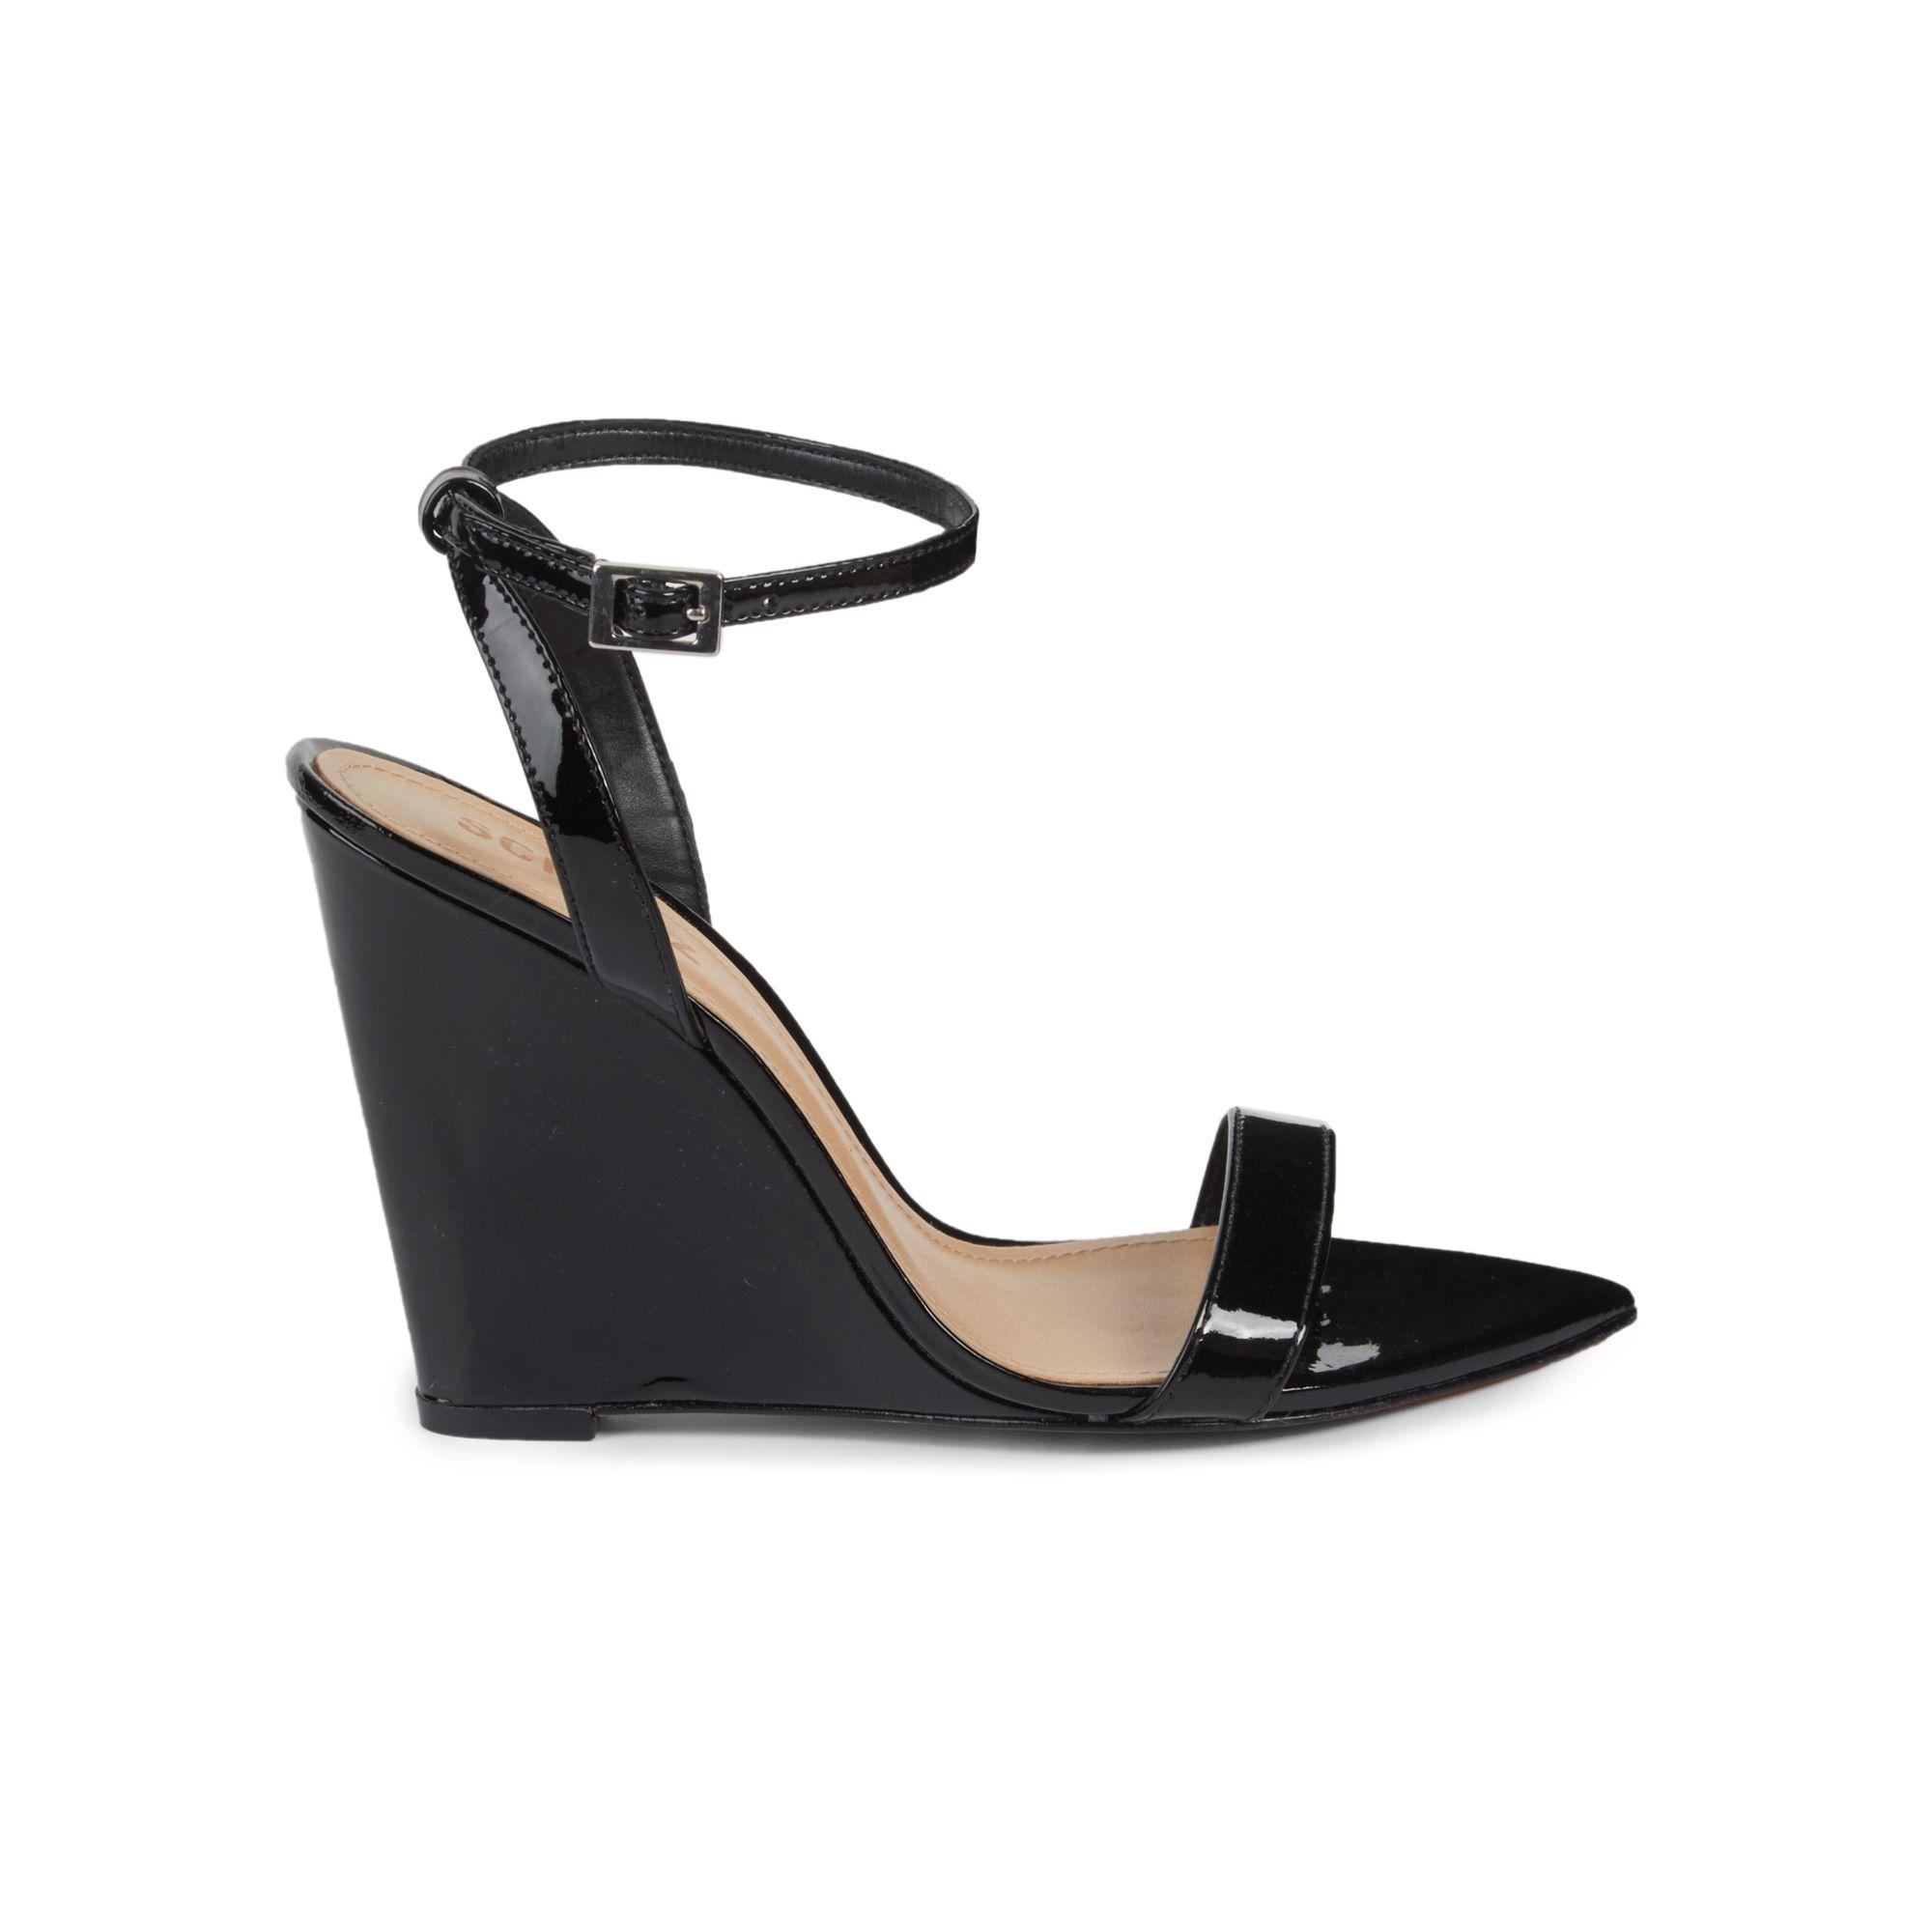 Schutz Ankle-strap Patent Leather Wedge Sandals in Black - Lyst